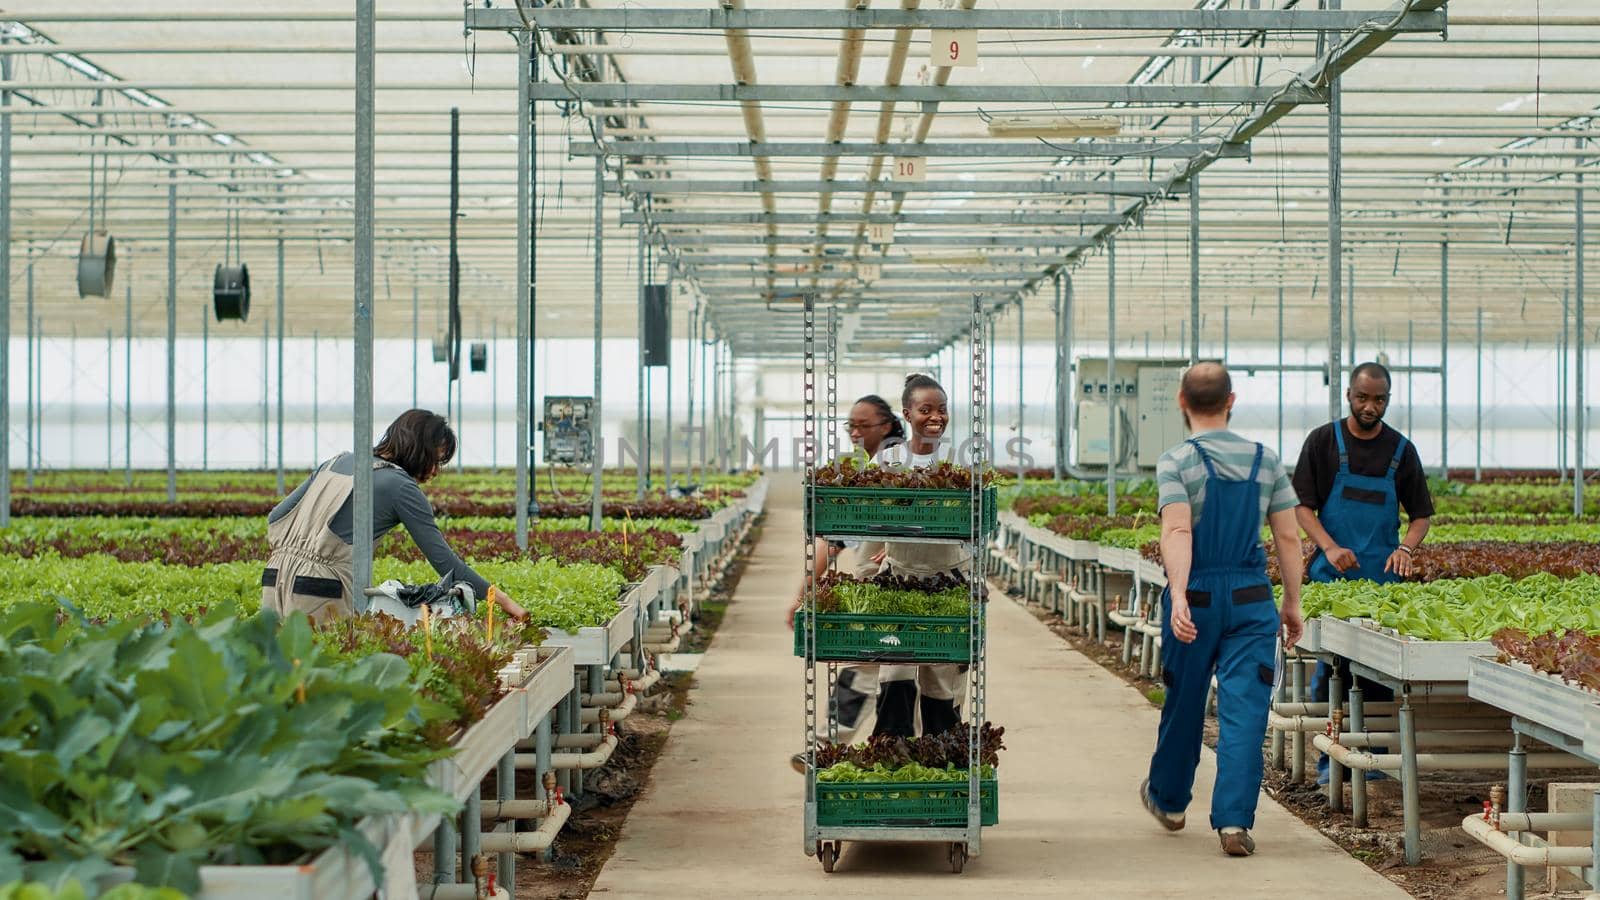 African american worker pushing rack with different types of lettuce while diverse group of greenhouse pickers greet by DCStudio